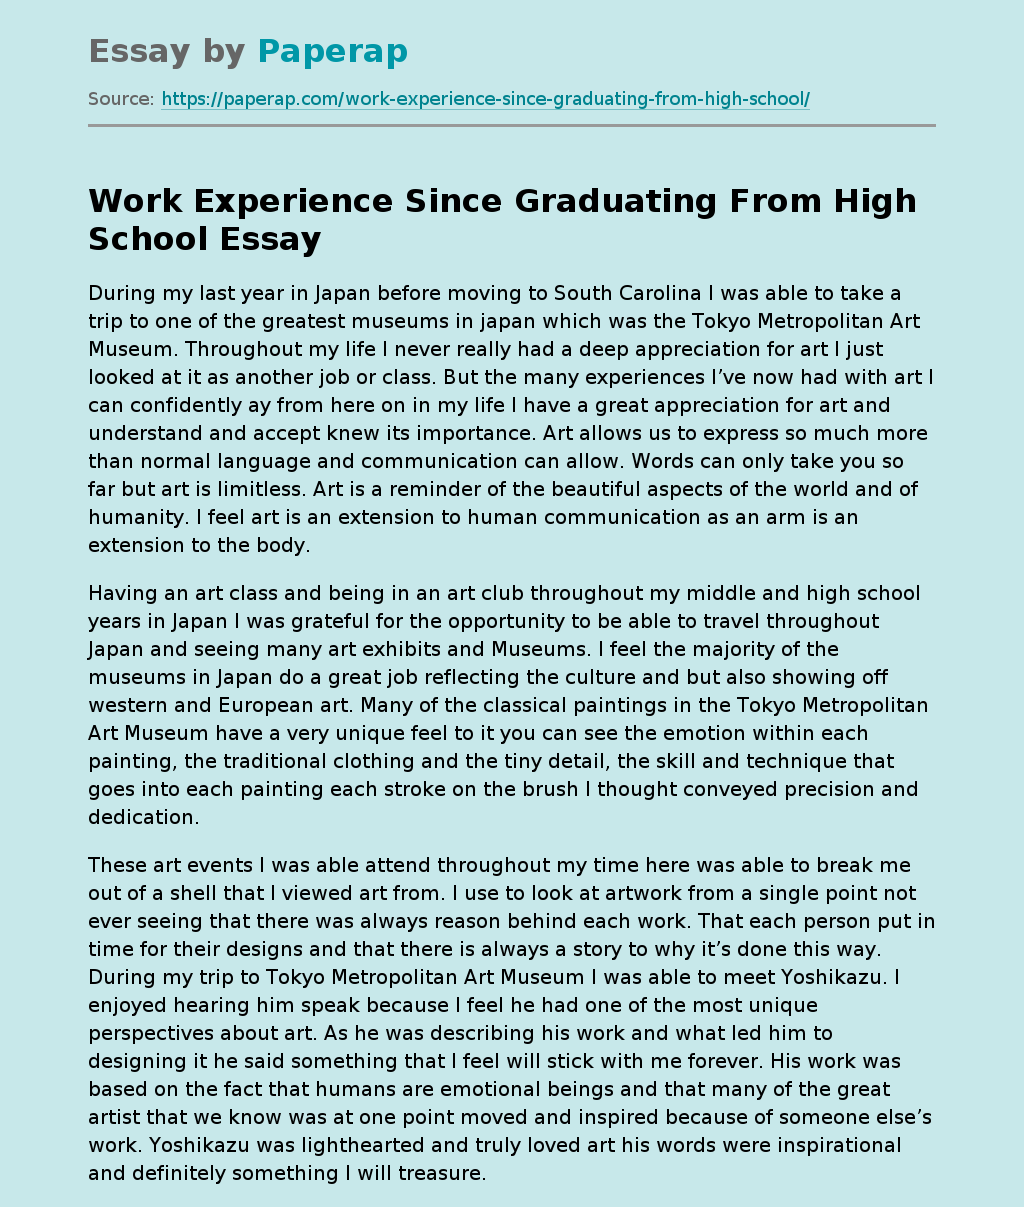 Work Experience Since Graduating From High School